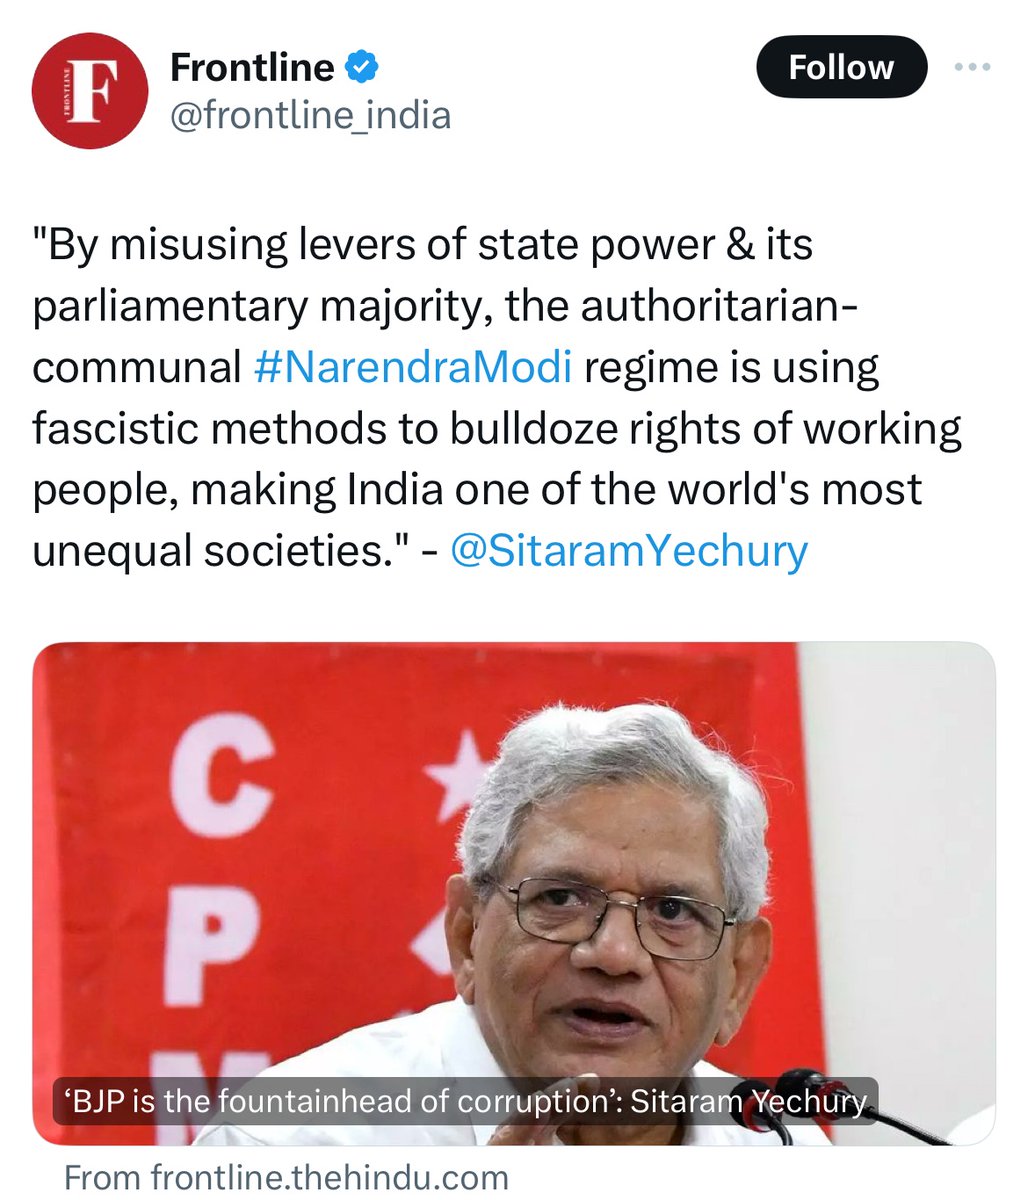 “We should make no mistake about it: the Lok Sabha election is about saving India, against the effort of the BJP to transform the secular, democratic character of the republic into a rabidly intolerant, hate- and violence- based authoritarian and fascistic Hindutva rashtra.”…